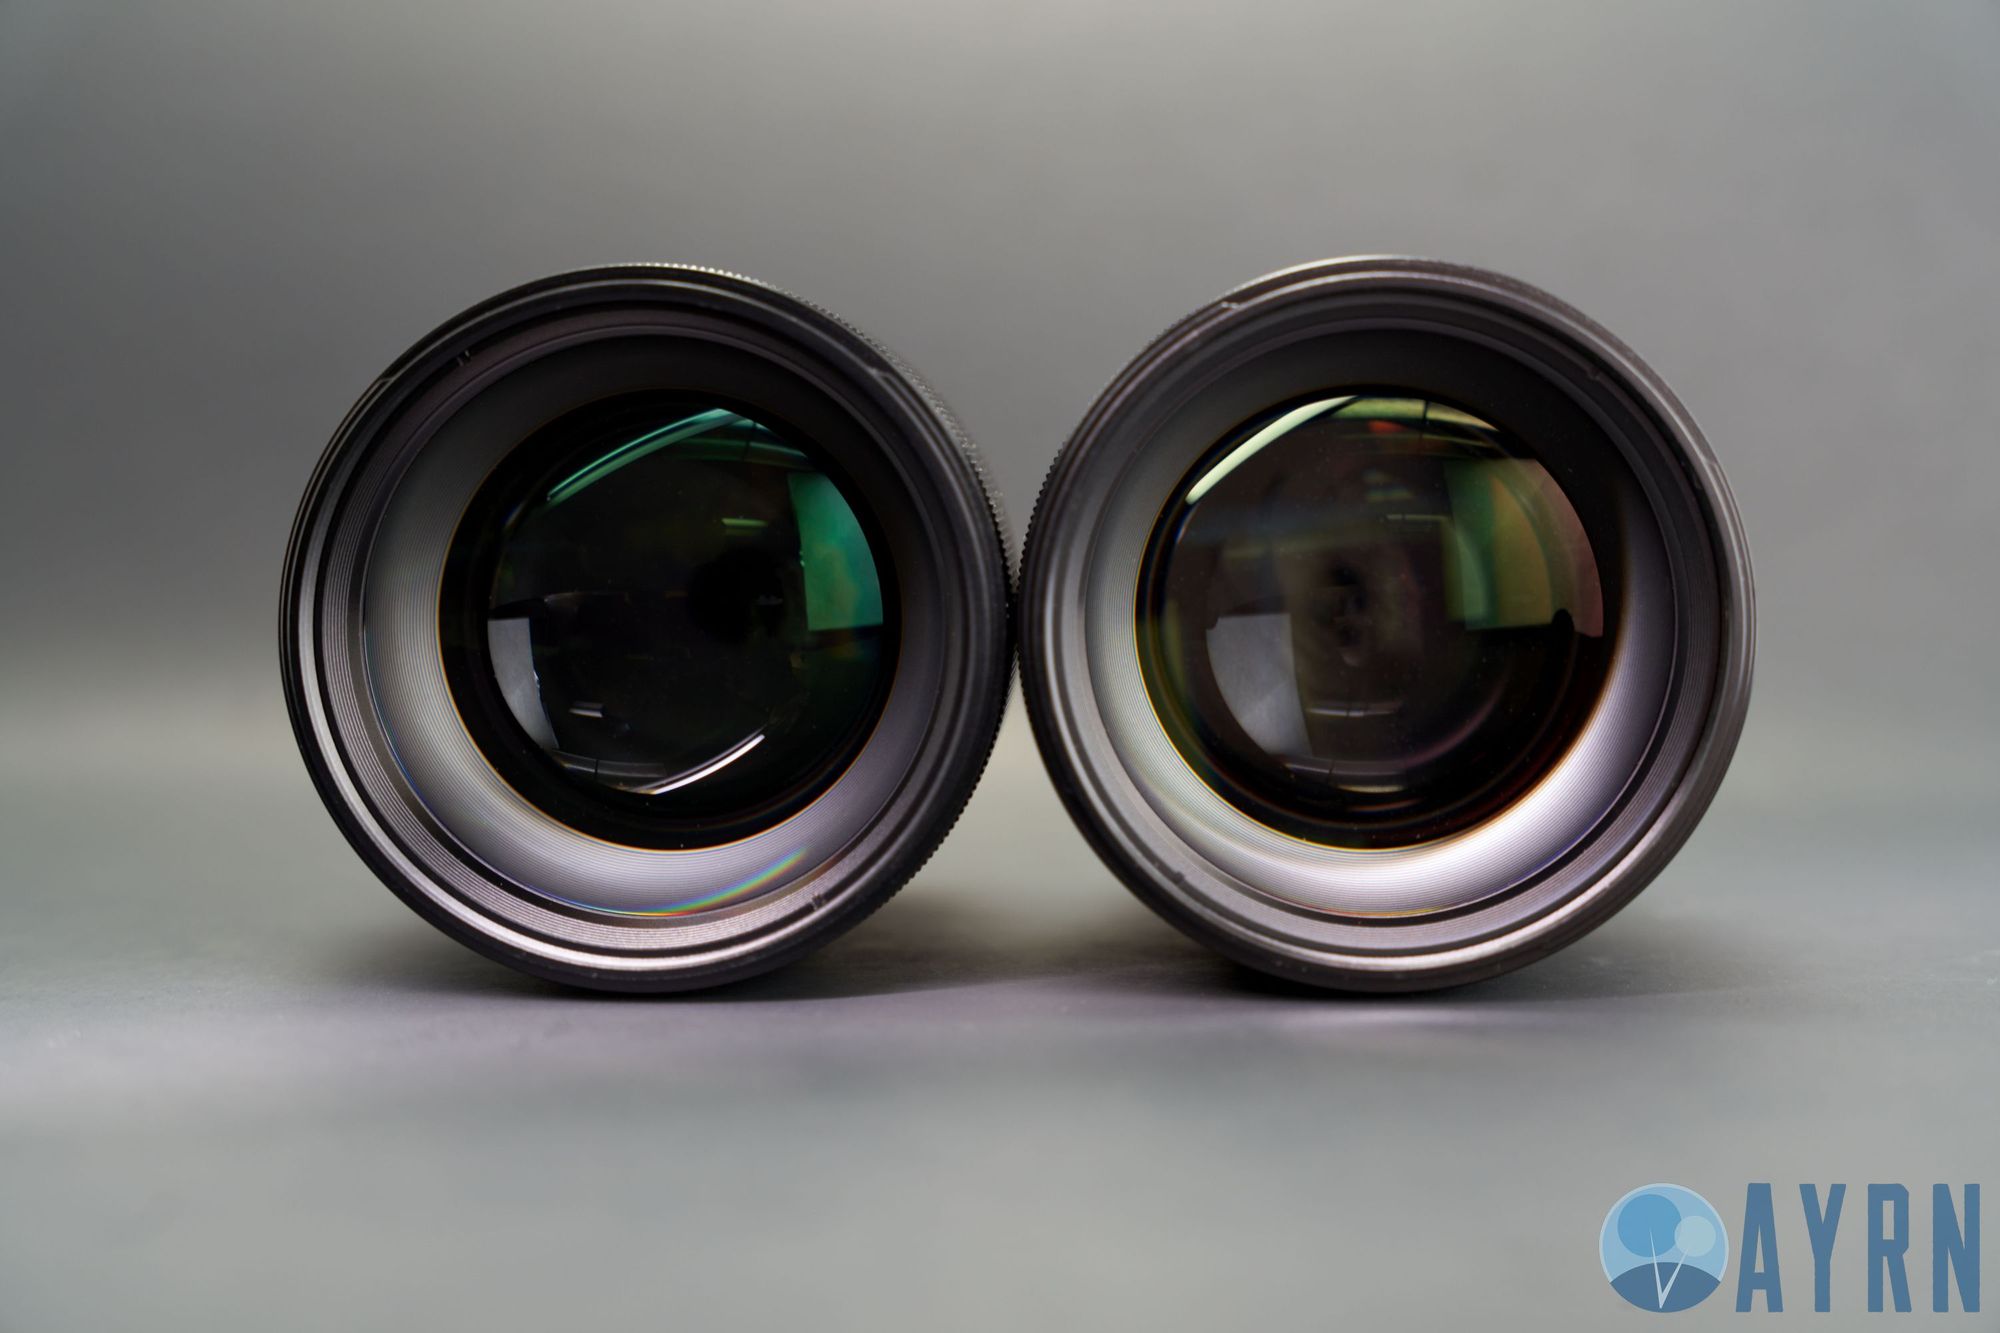 Side by side image of the Viltrox 85mm f1.8 STM (left) and Tokina ATX-M 85mm f1.8 (view of front elements)